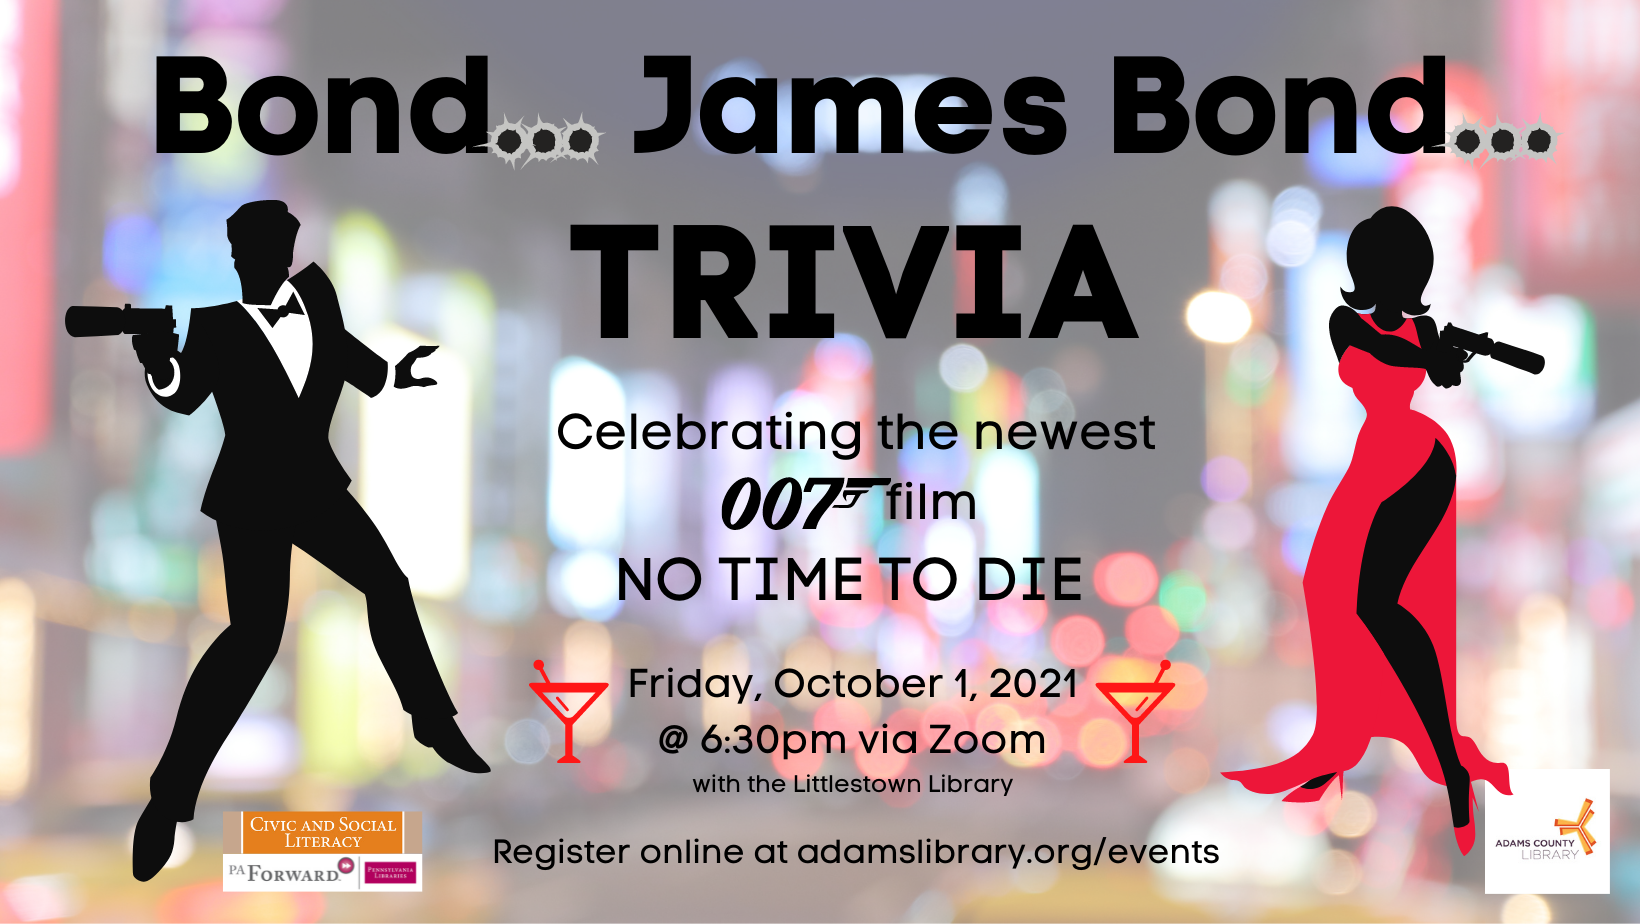 Join us for a virtual James Bond Trivia Night on Friday, October 1, 2021 via Zoom to celebrate the newest 007 movie No Time To Die.